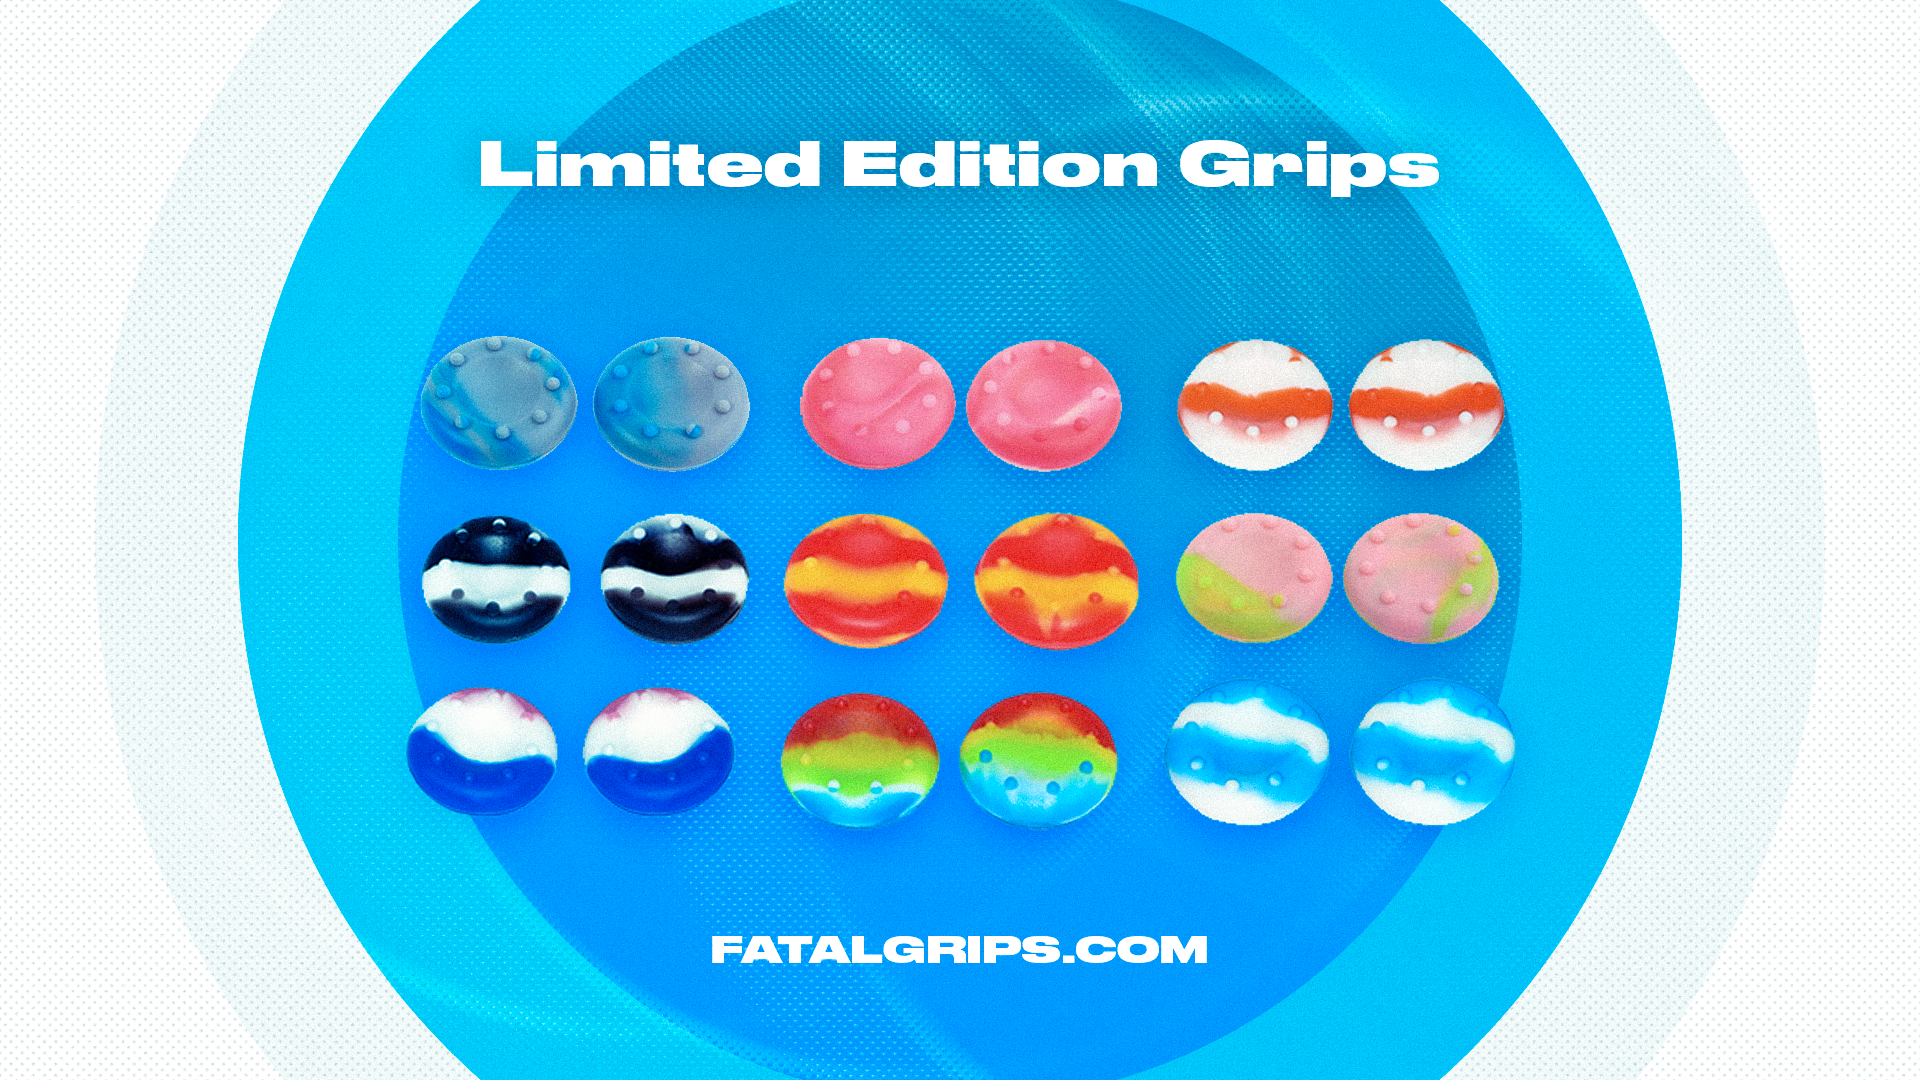 Limited Edition Grips - Fatal Grips